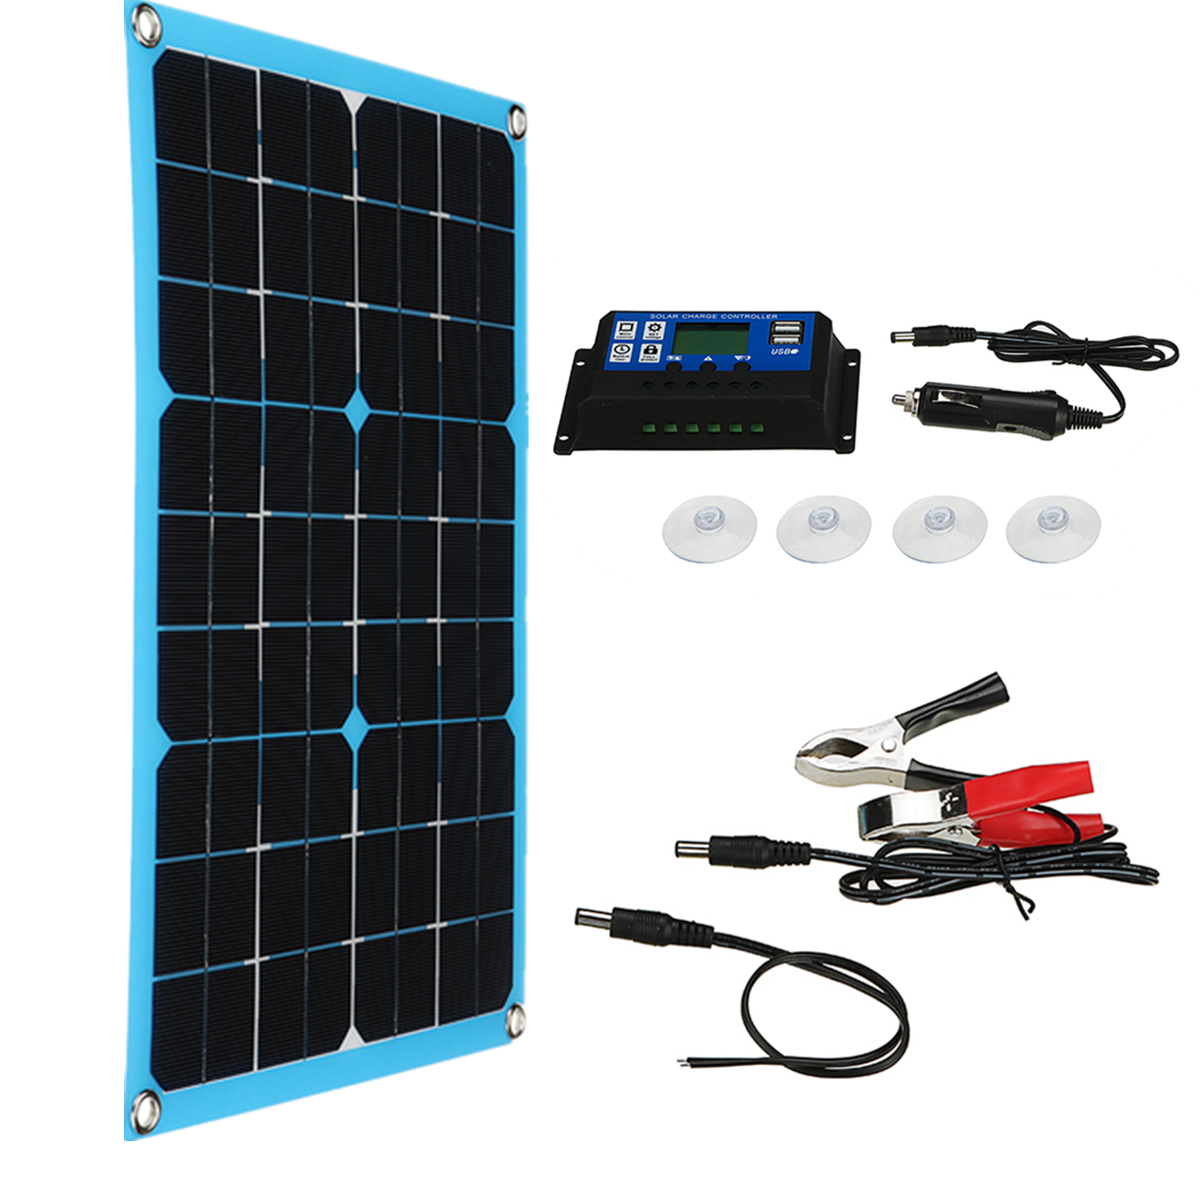 Find Monocrystalline Solar Panel Power Inverter System DC / USB Solar Charger With Controller For Home Car RV Boat Battery Charger for Sale on Gipsybee.com with cryptocurrencies